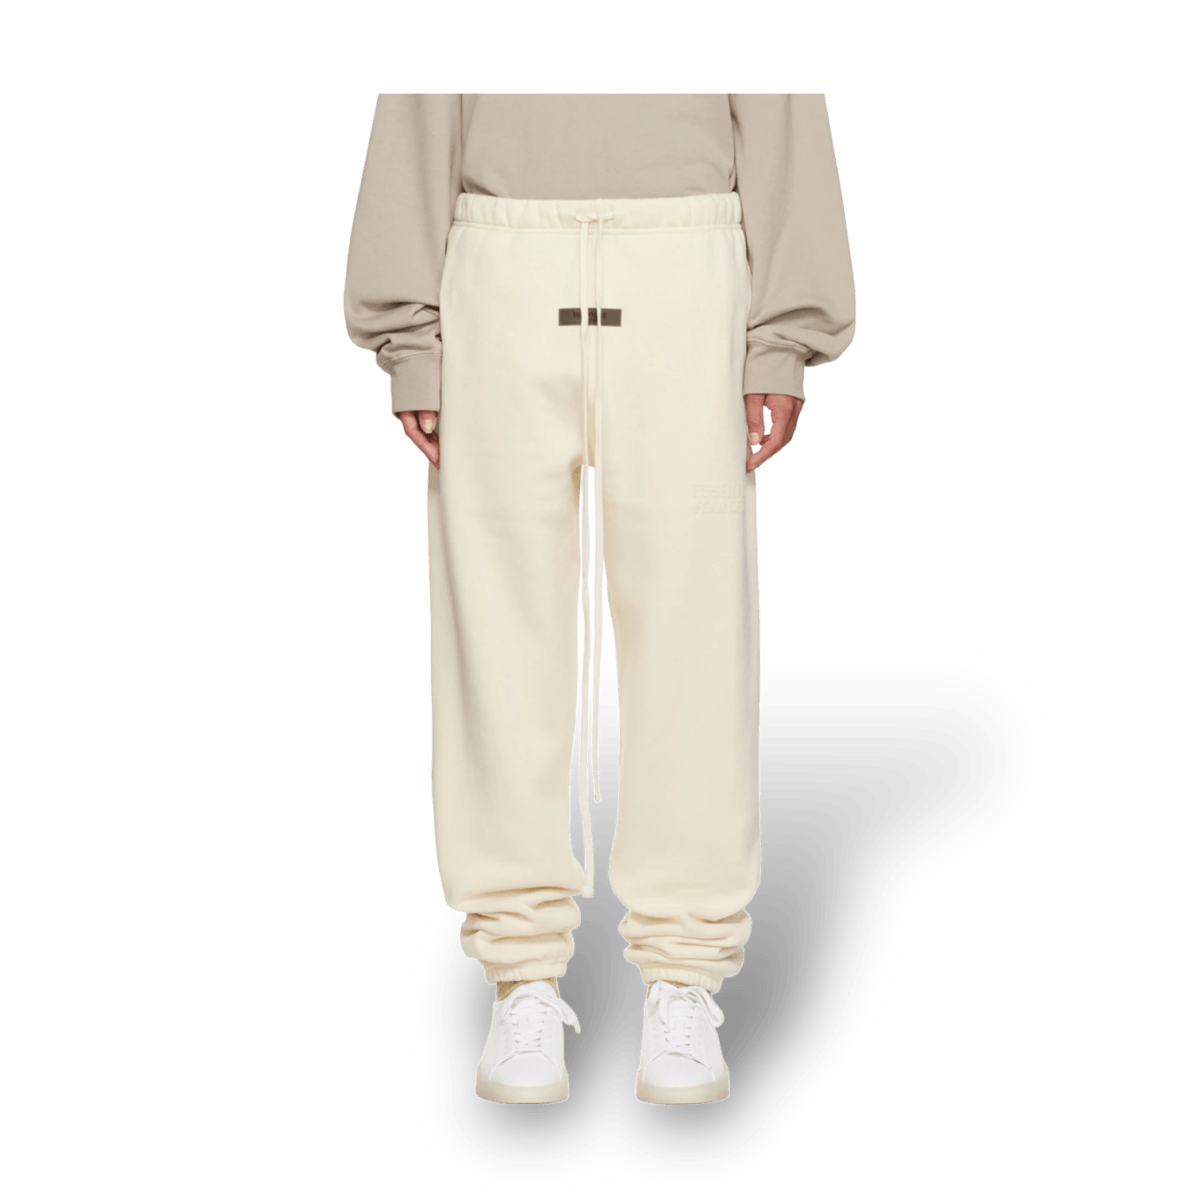 Essentials Fear of God Tapered Cream Sweat Pants - Bottoms - Essentials - Jawns on Fire - sneakers